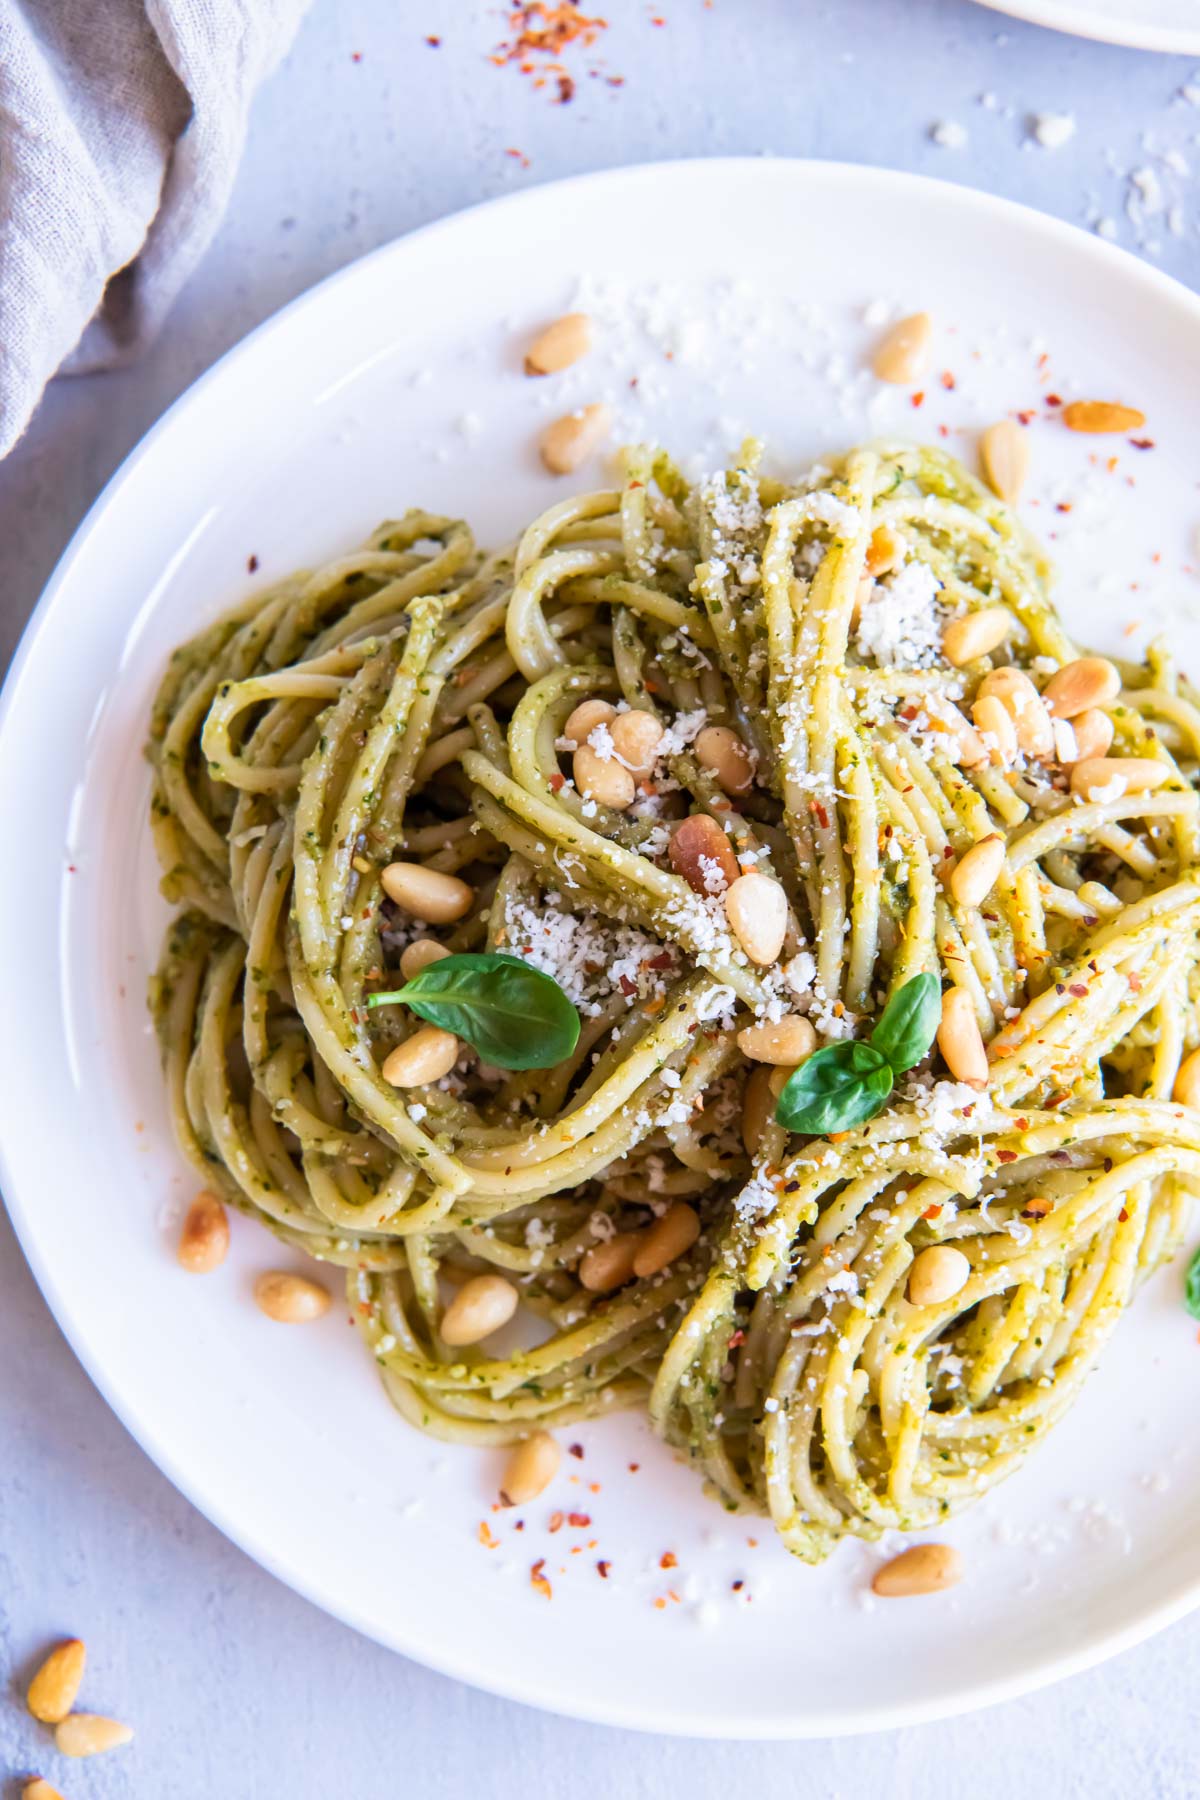 Pesto pasta with pine nuts, parmesan and basil served on a plate.